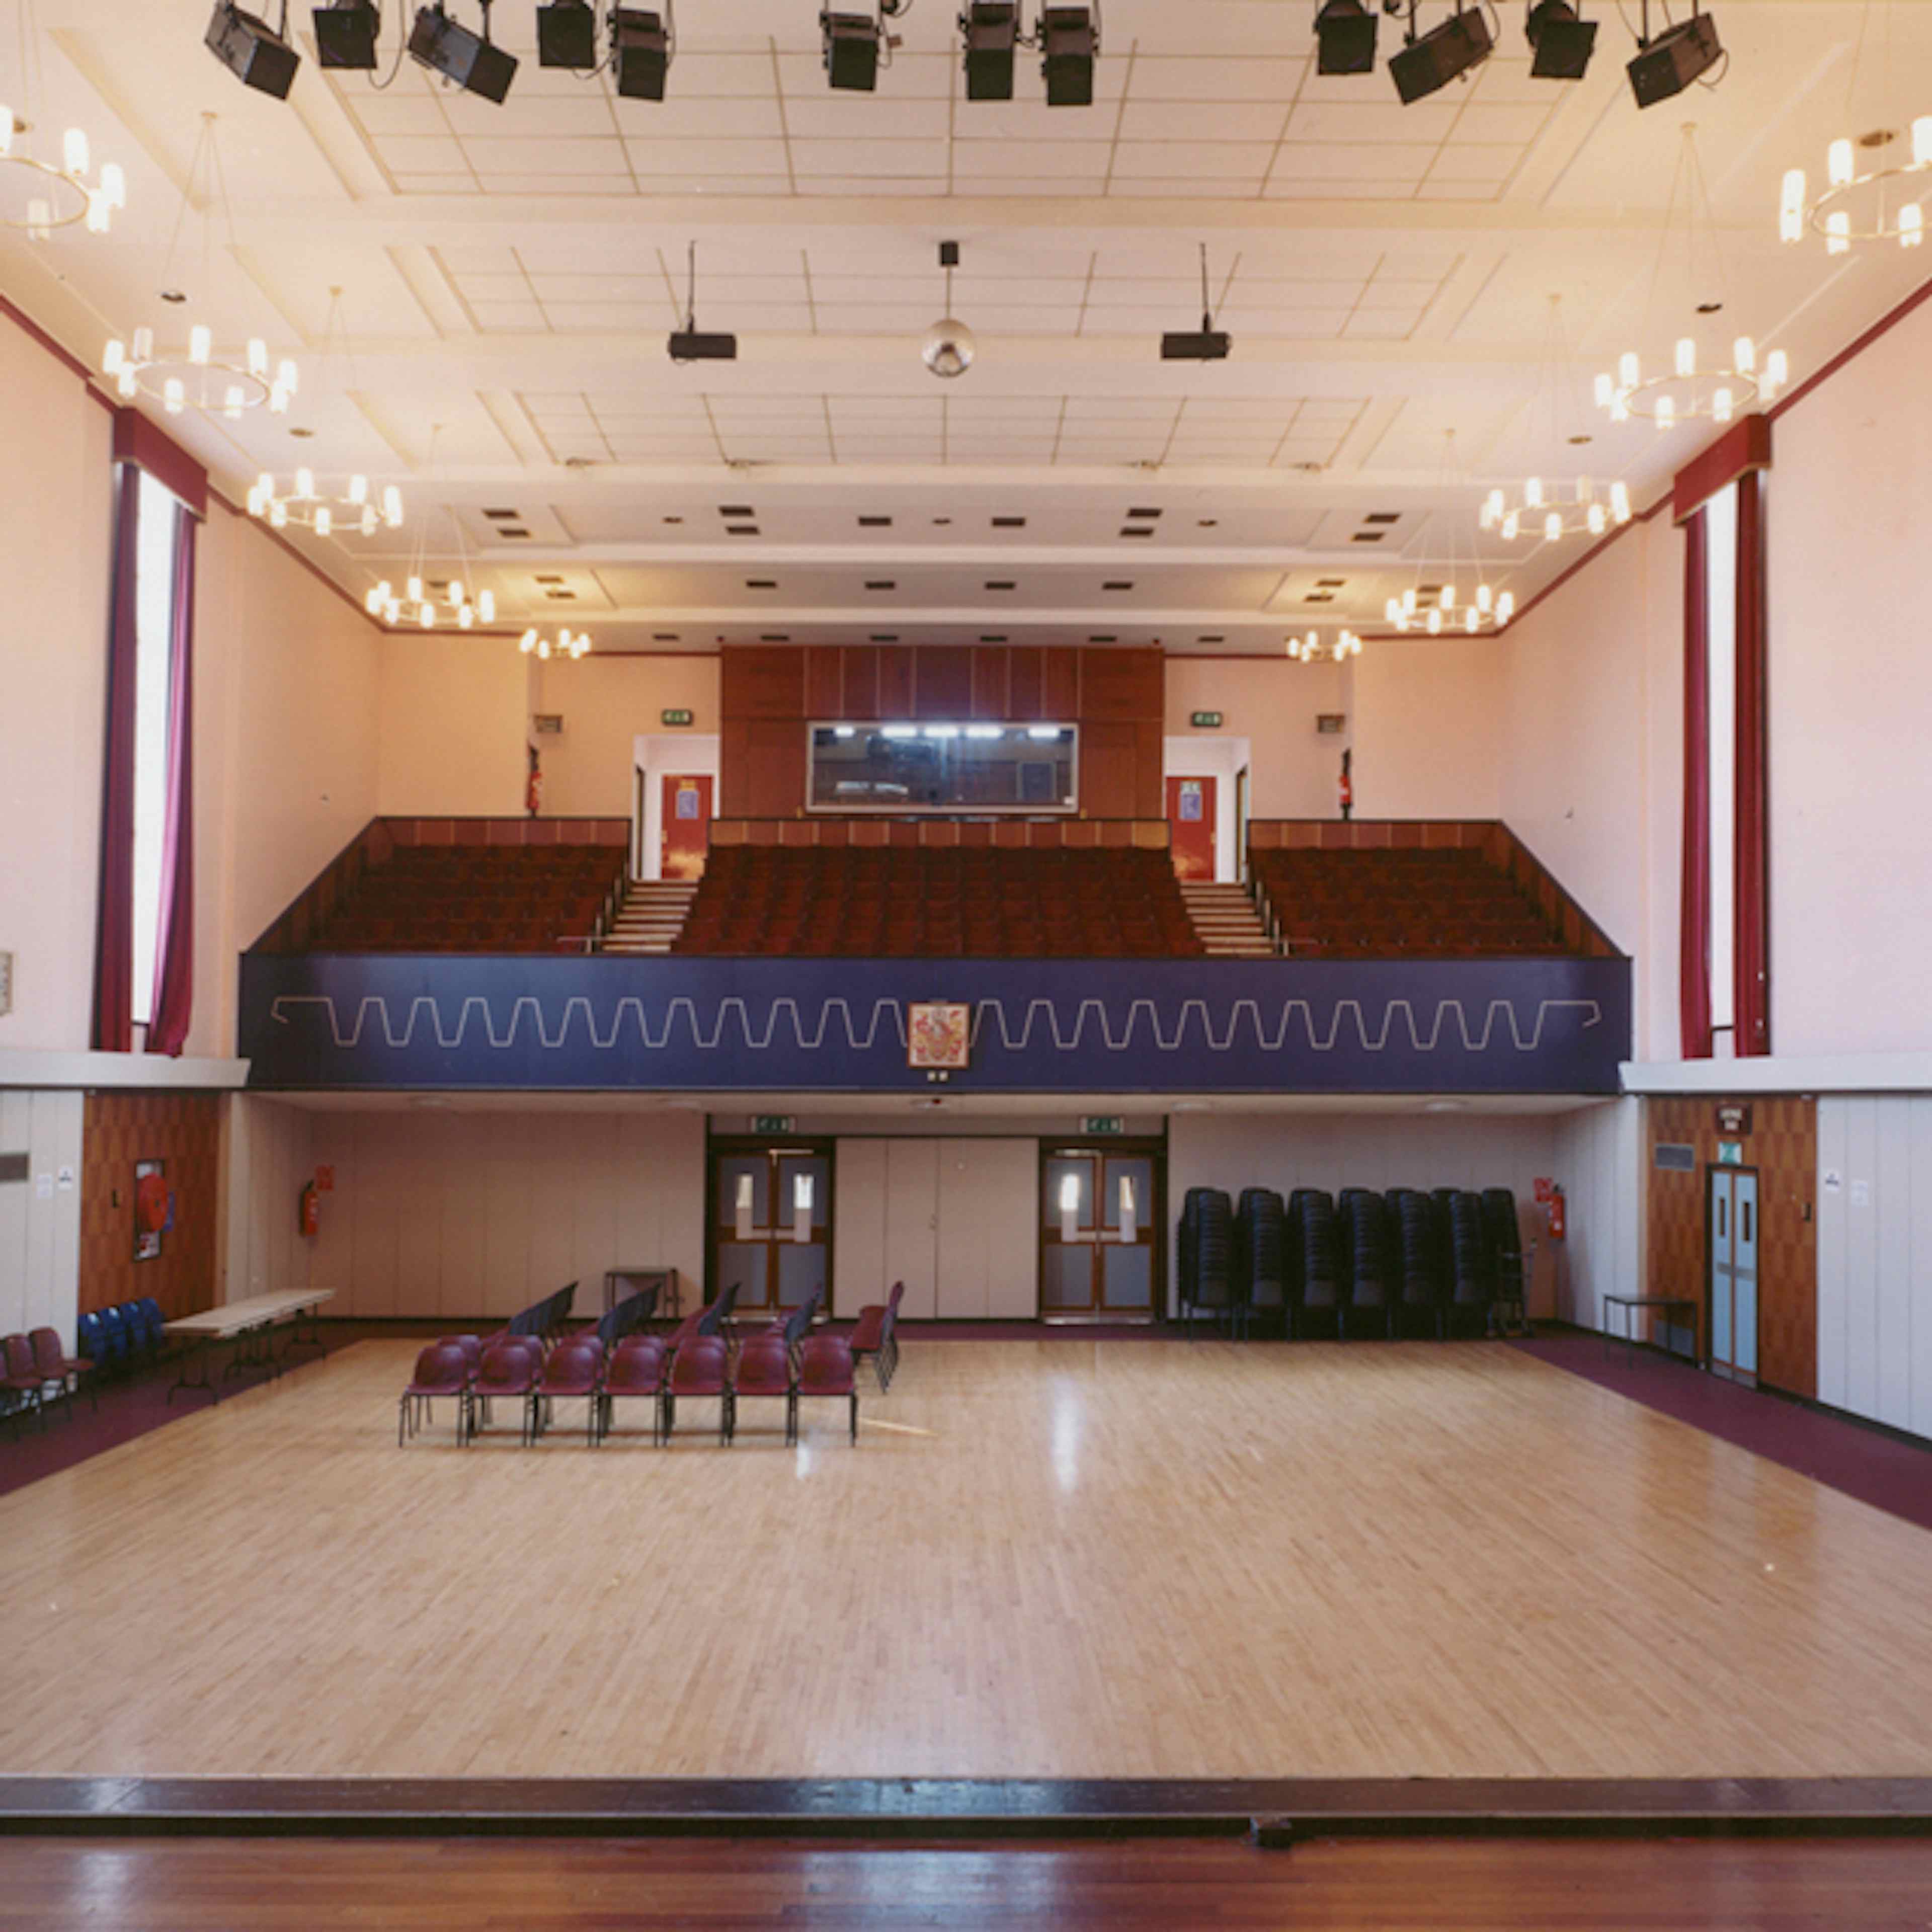 Brierley Hill Civic Hall - image 2